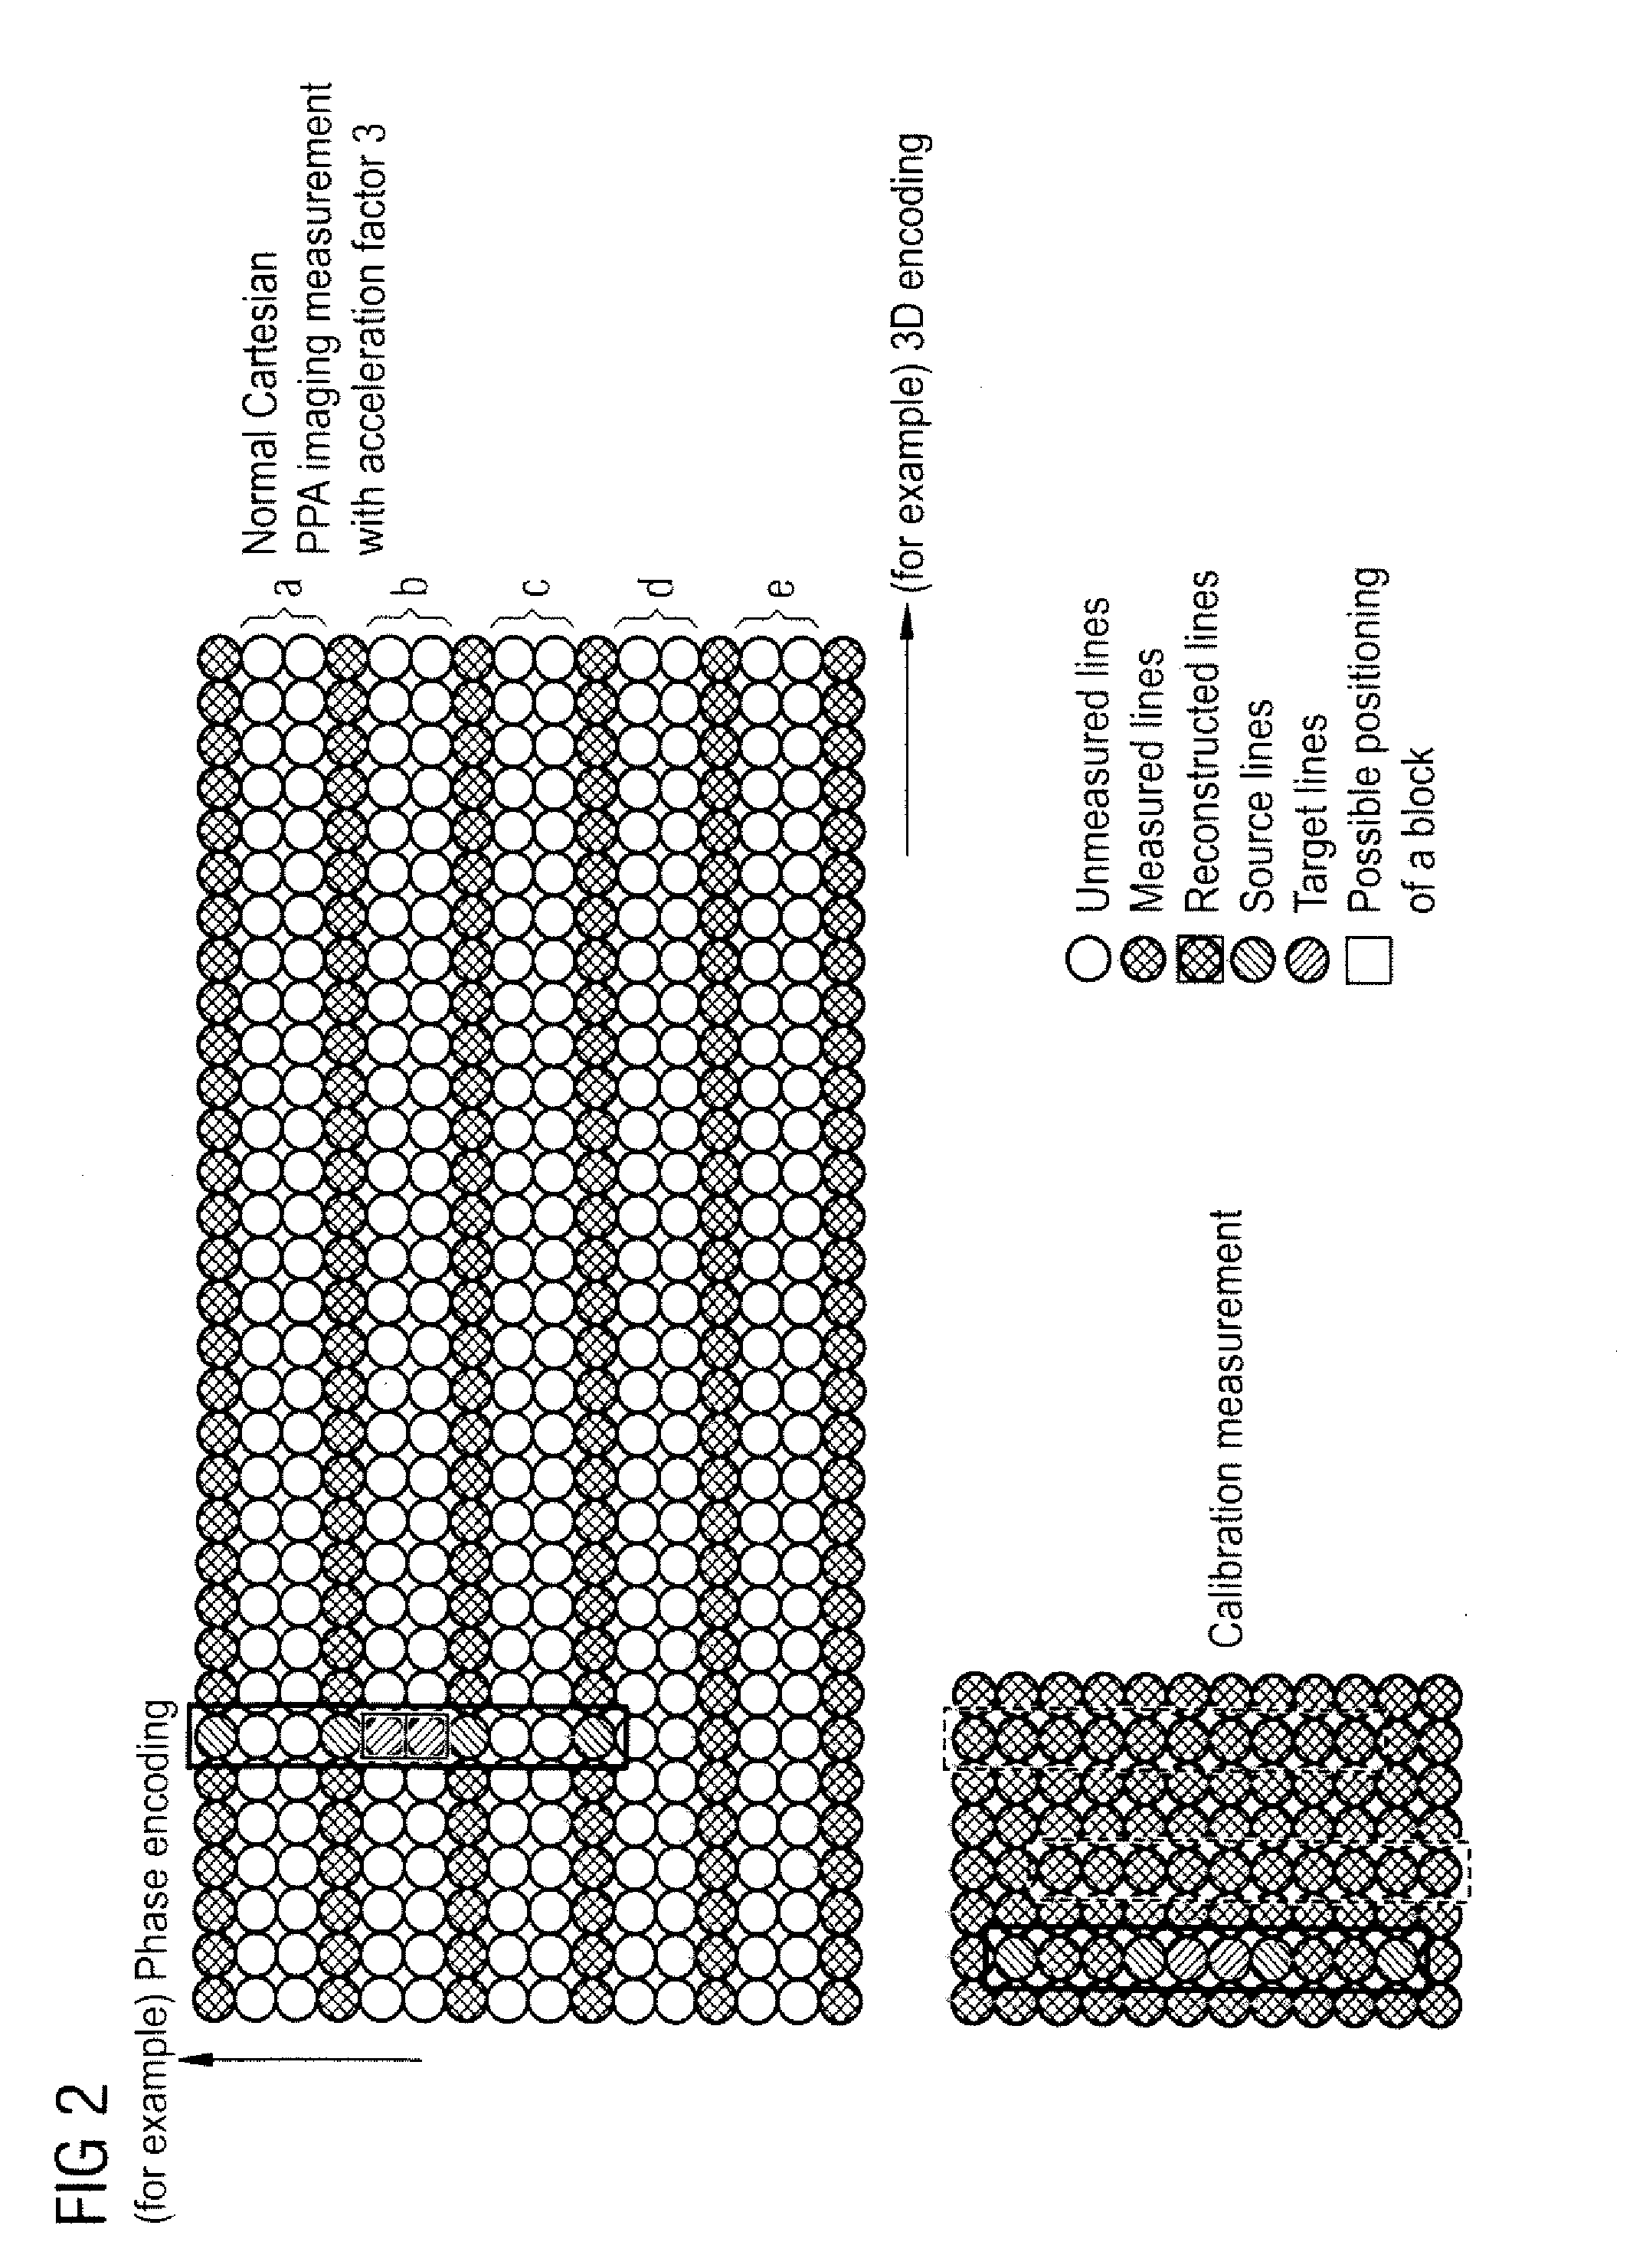 Method and apparatus for sensitivity-encoded magnetic resonance imaging using an acquisition coil array